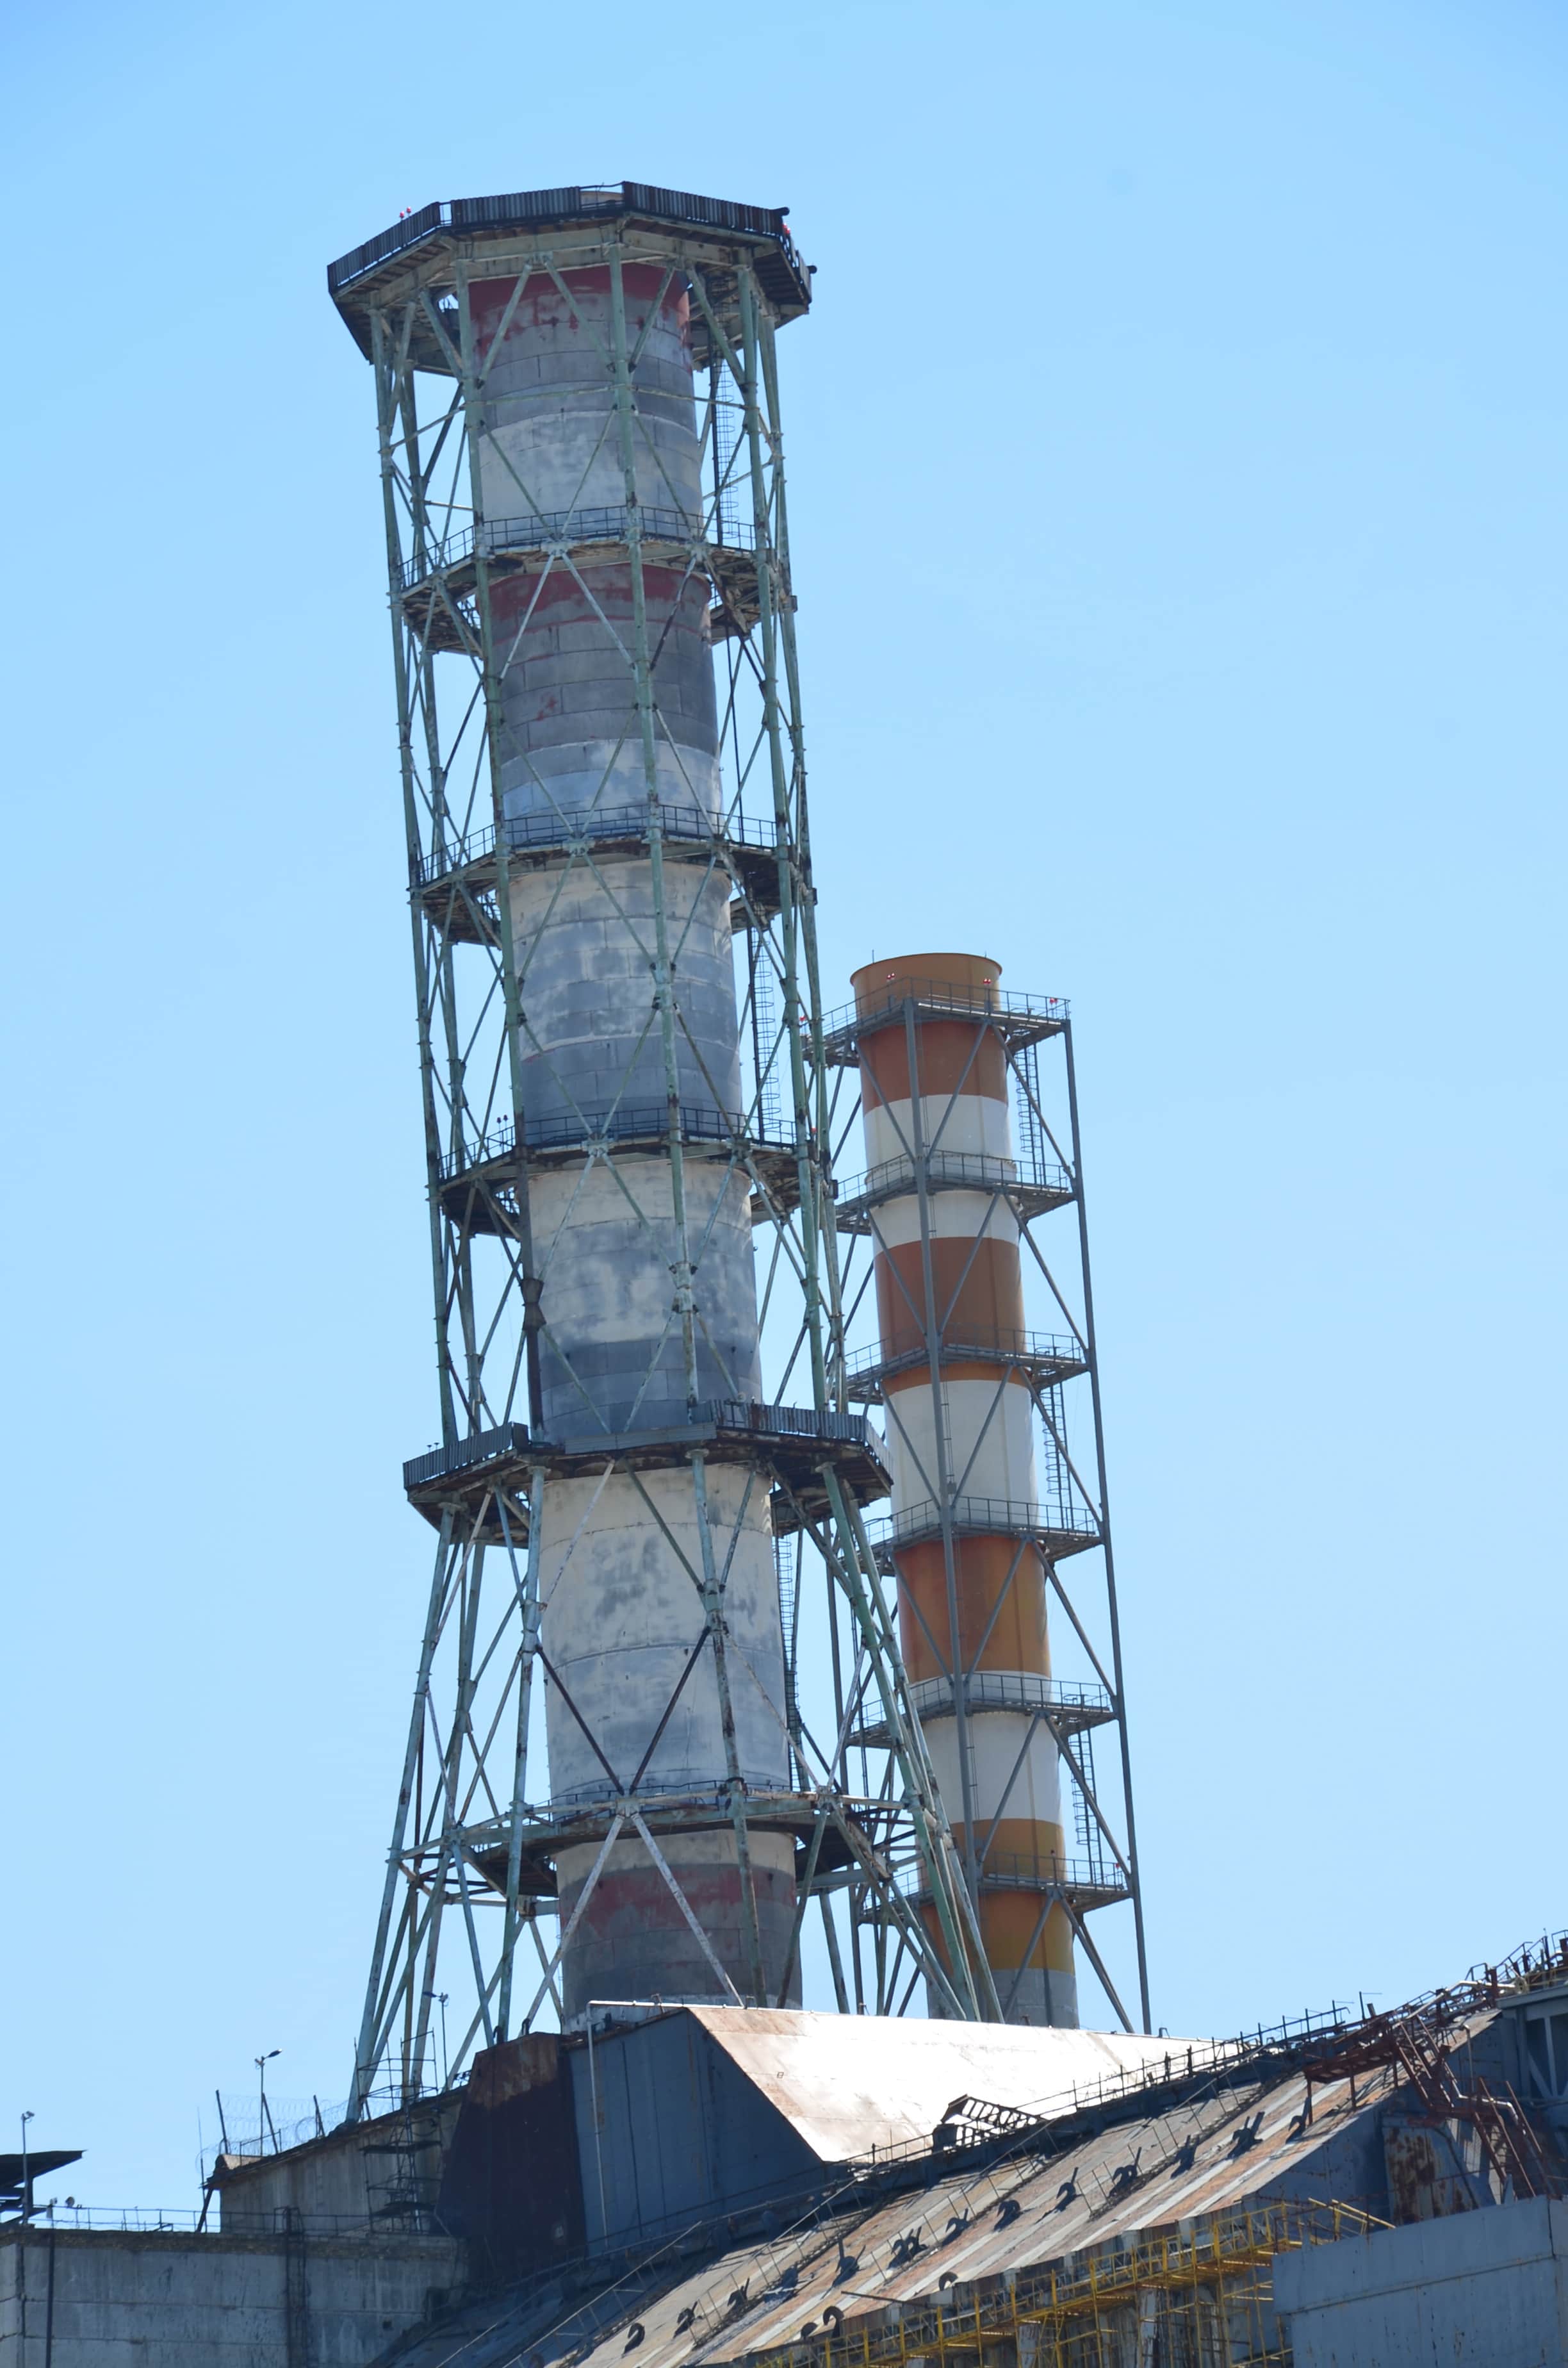 Chimney of Reactors #3 and #4 at Chernobyl Nuclear Power Plant in Chernobyl Exclusion Zone, Ukraine